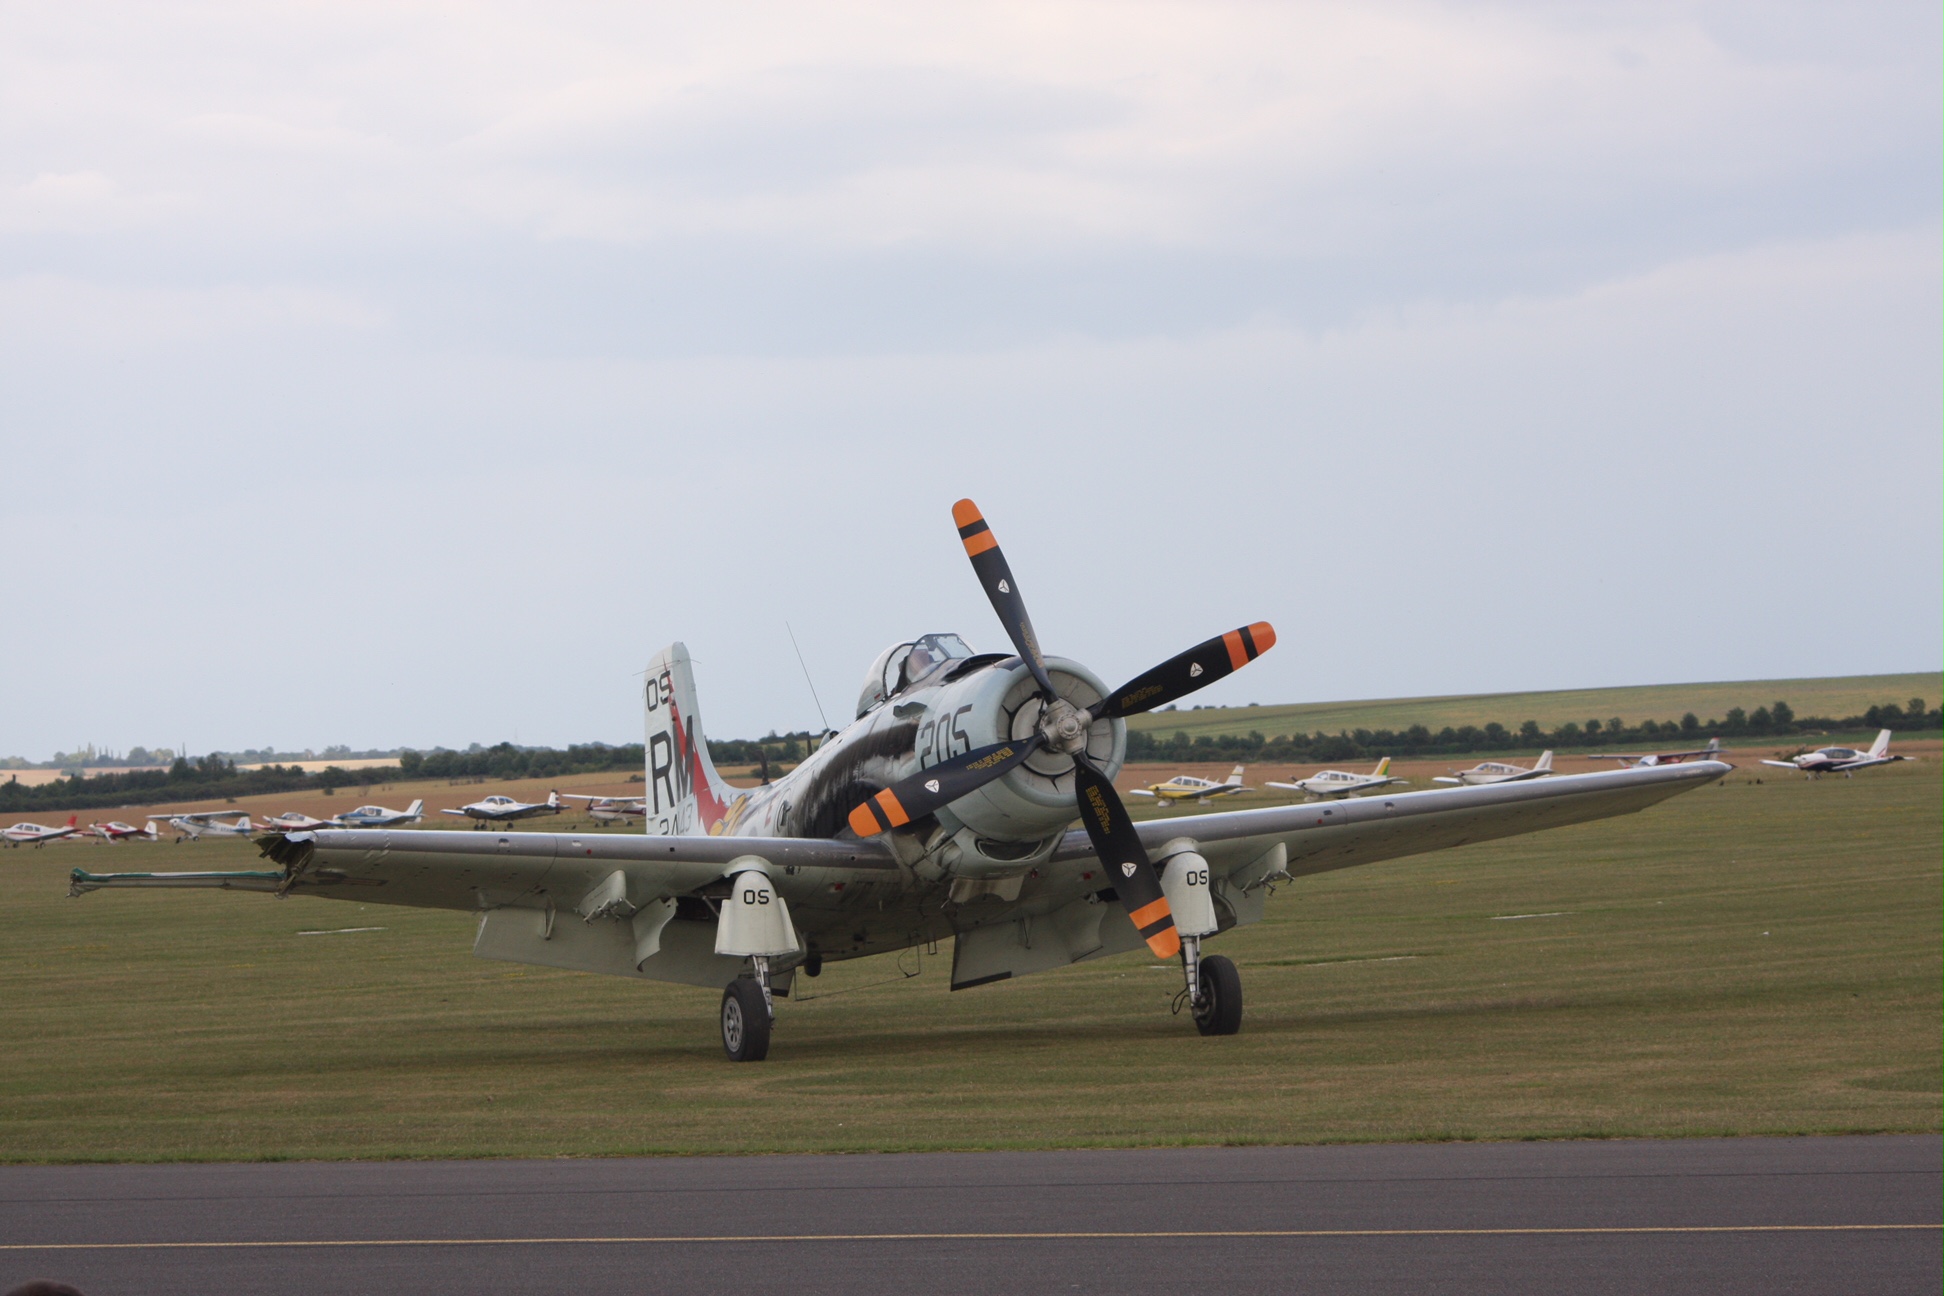 Flying Legends Duxford. Skyraider. Notice how much wing is missing, yet it still landed safely.